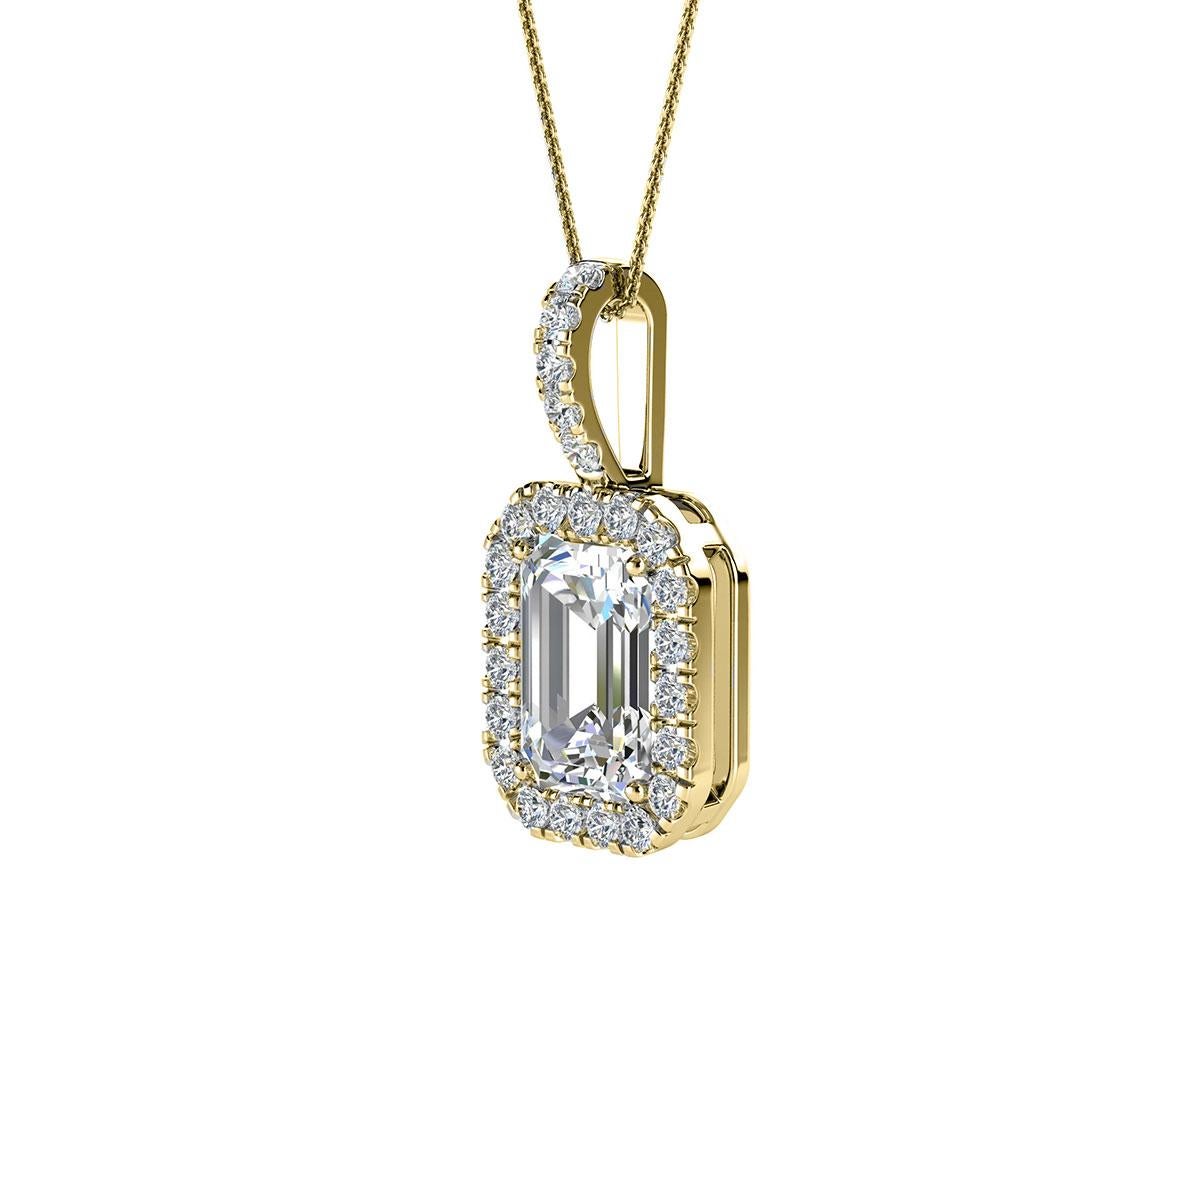 This delicate pendant feature one emerald shaped diamond that is approximately 0.65-carat total weight ( 6mm x 4mm) encircled by a halo of perfectly matched 23 round brilliant diamonds in about 0.12-carat total weight. The pendant is measuring at 15